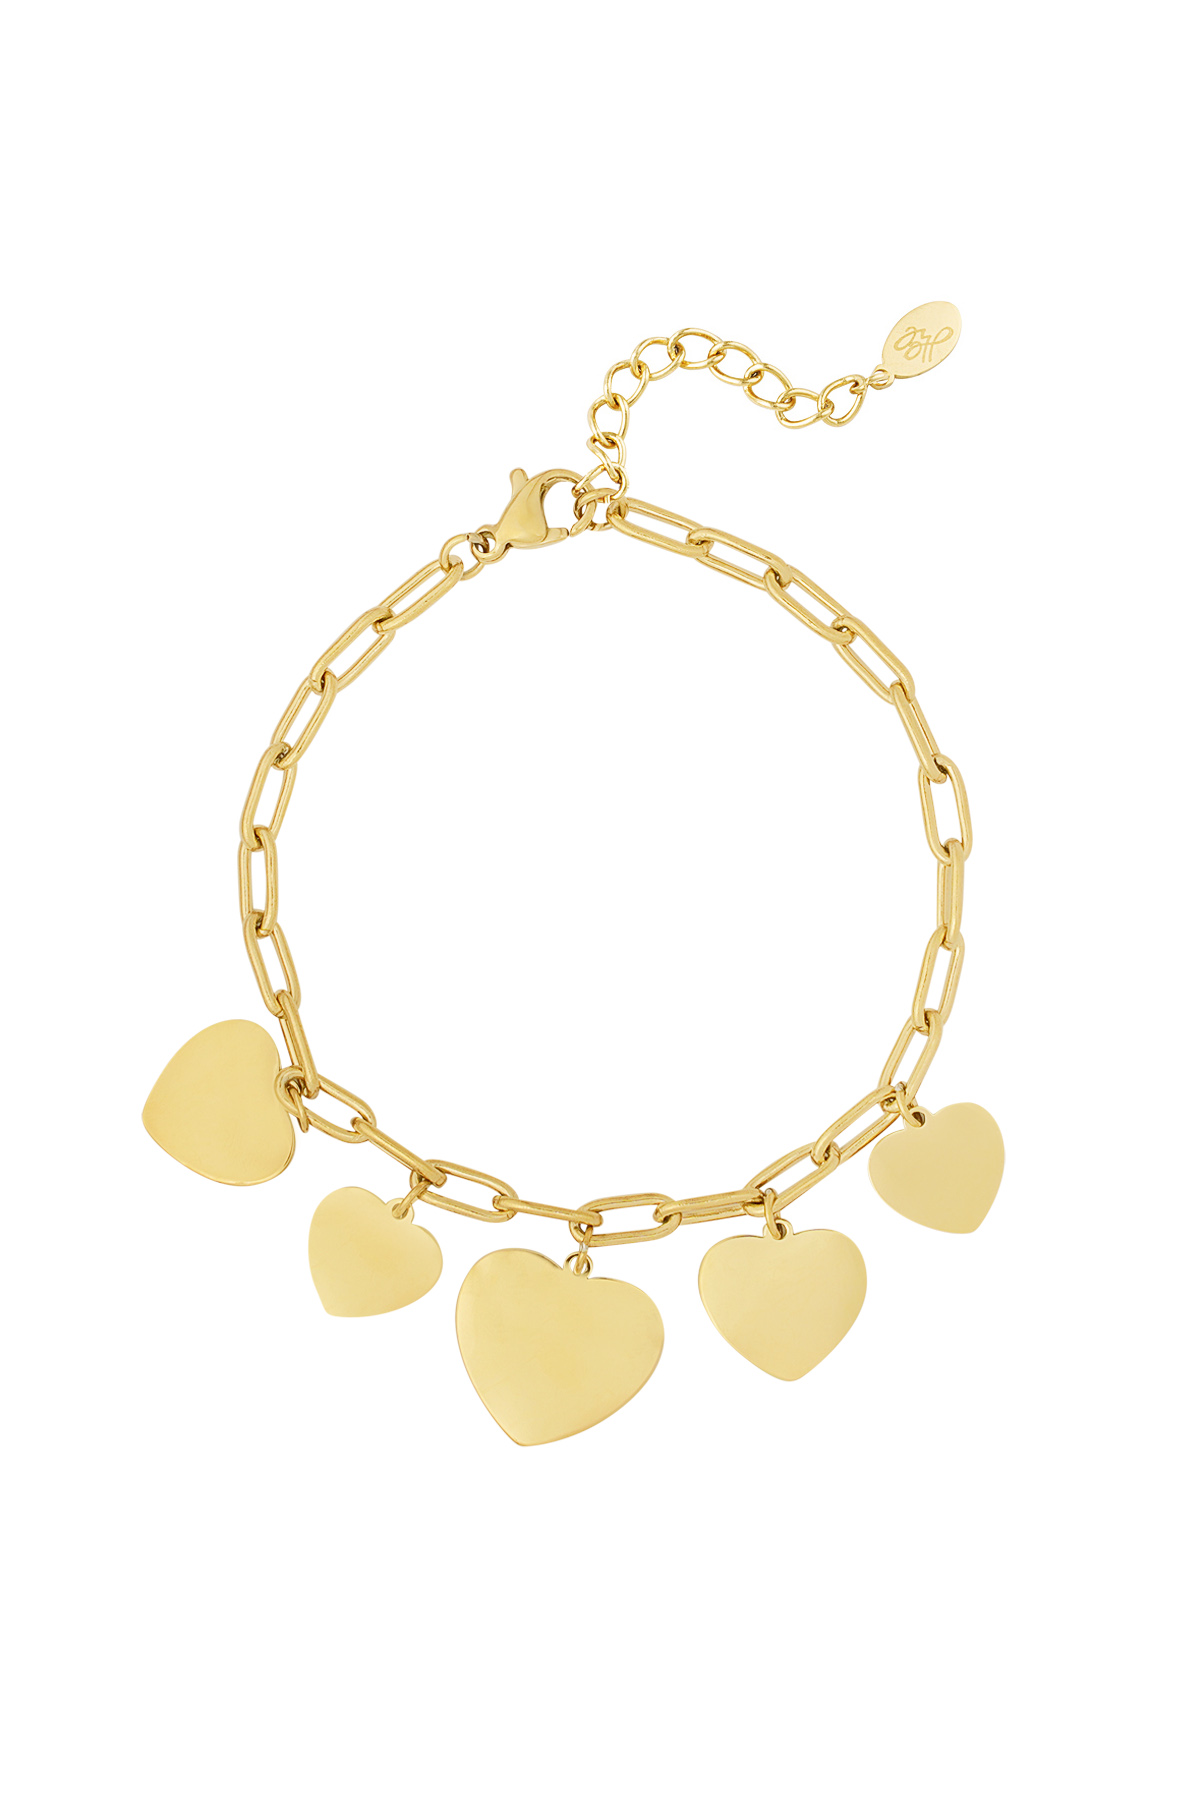 Linked bracelet with heart charms - gold 